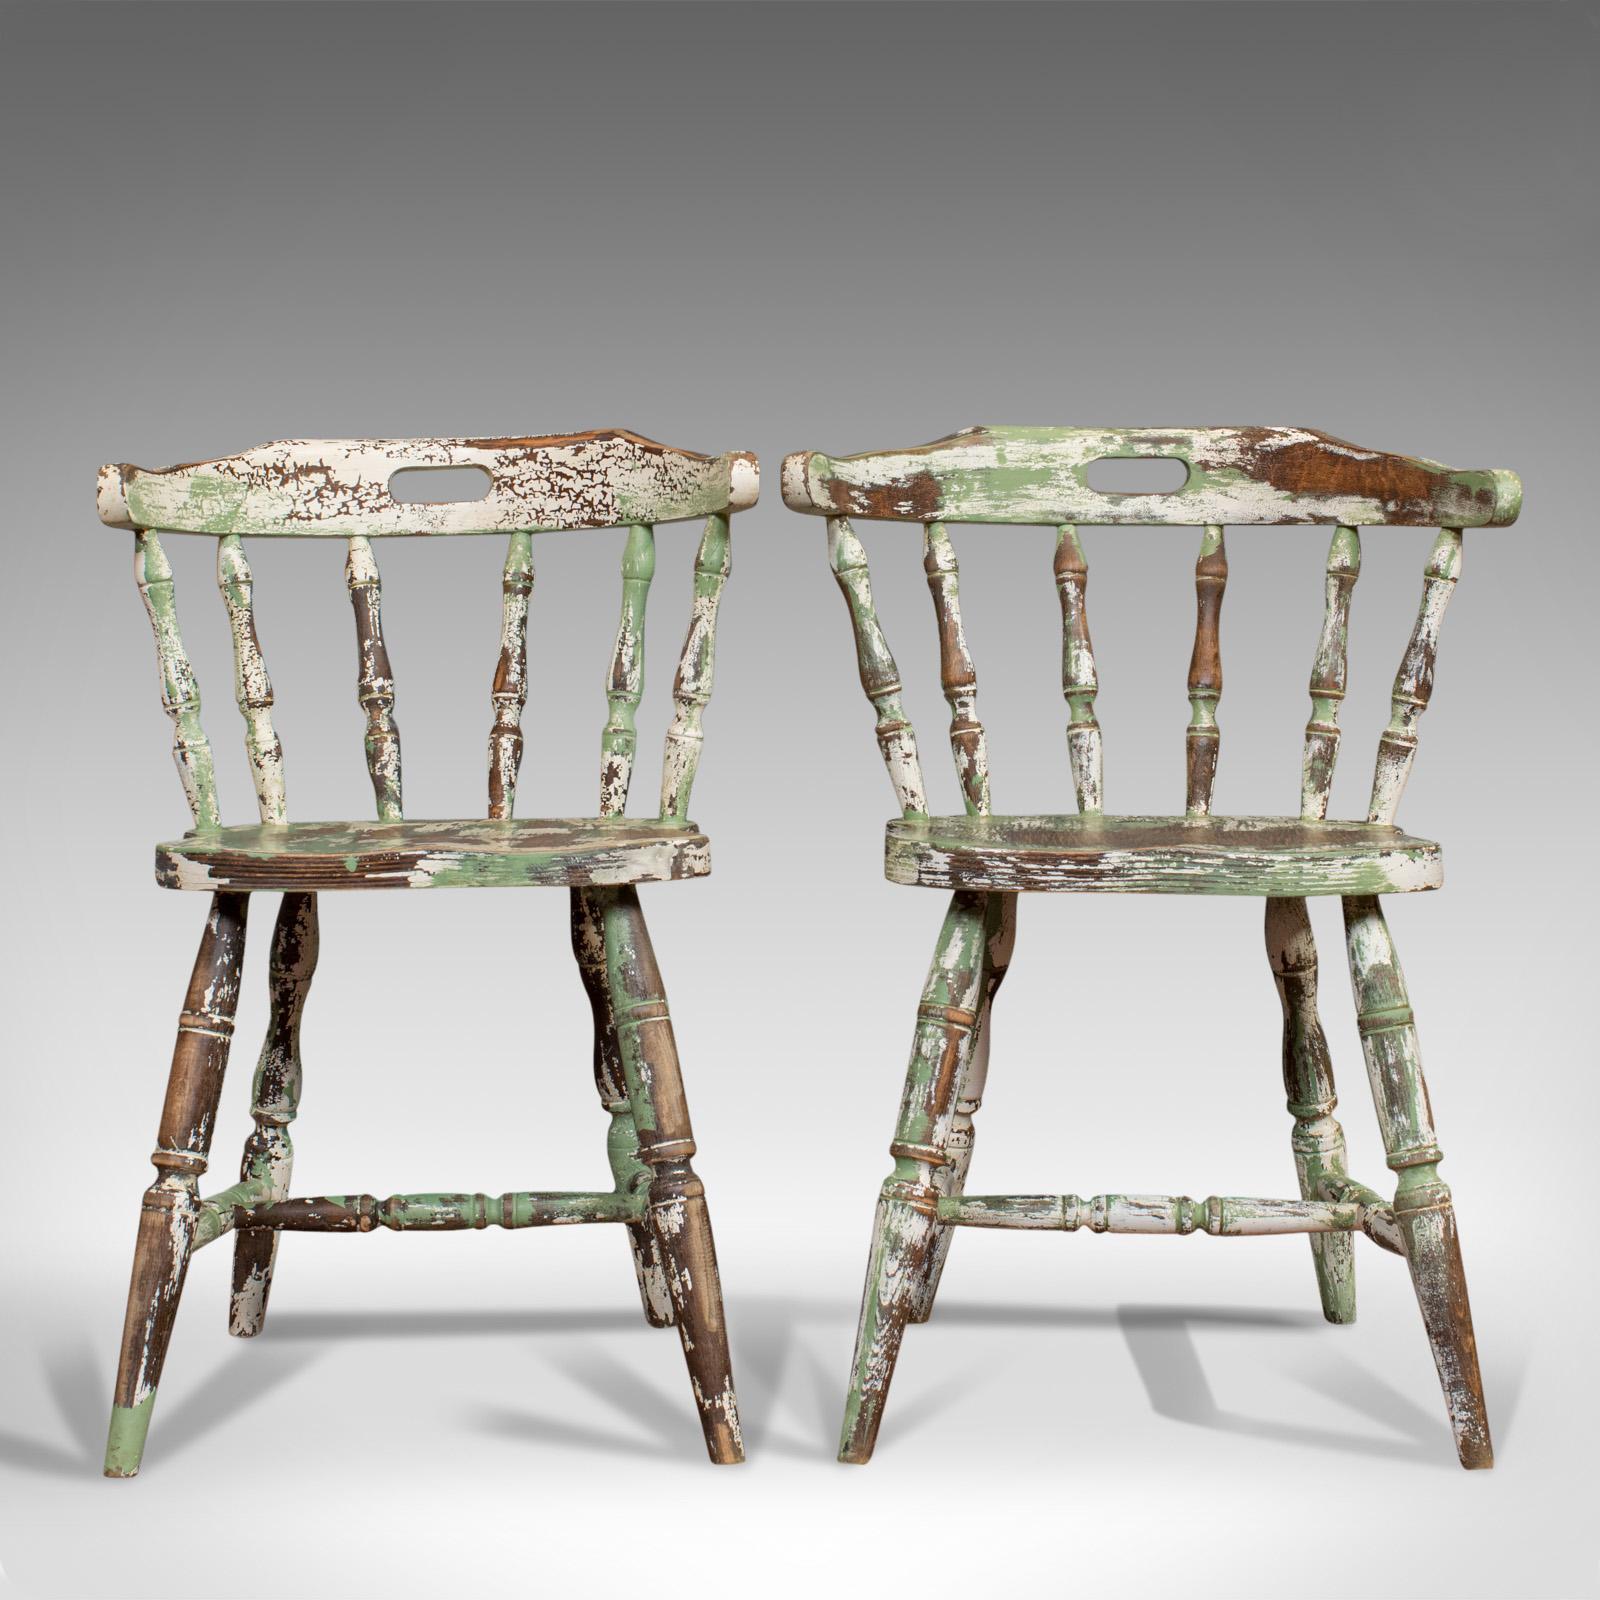 This is a pair of antique Windsor chairs. A French, beech bow-back chair, dating to the late 19th century, circa 1900.

French country farmhouse taste
Displays a desirable aged patina
Crafted from solid, dark French beech
Painted finish